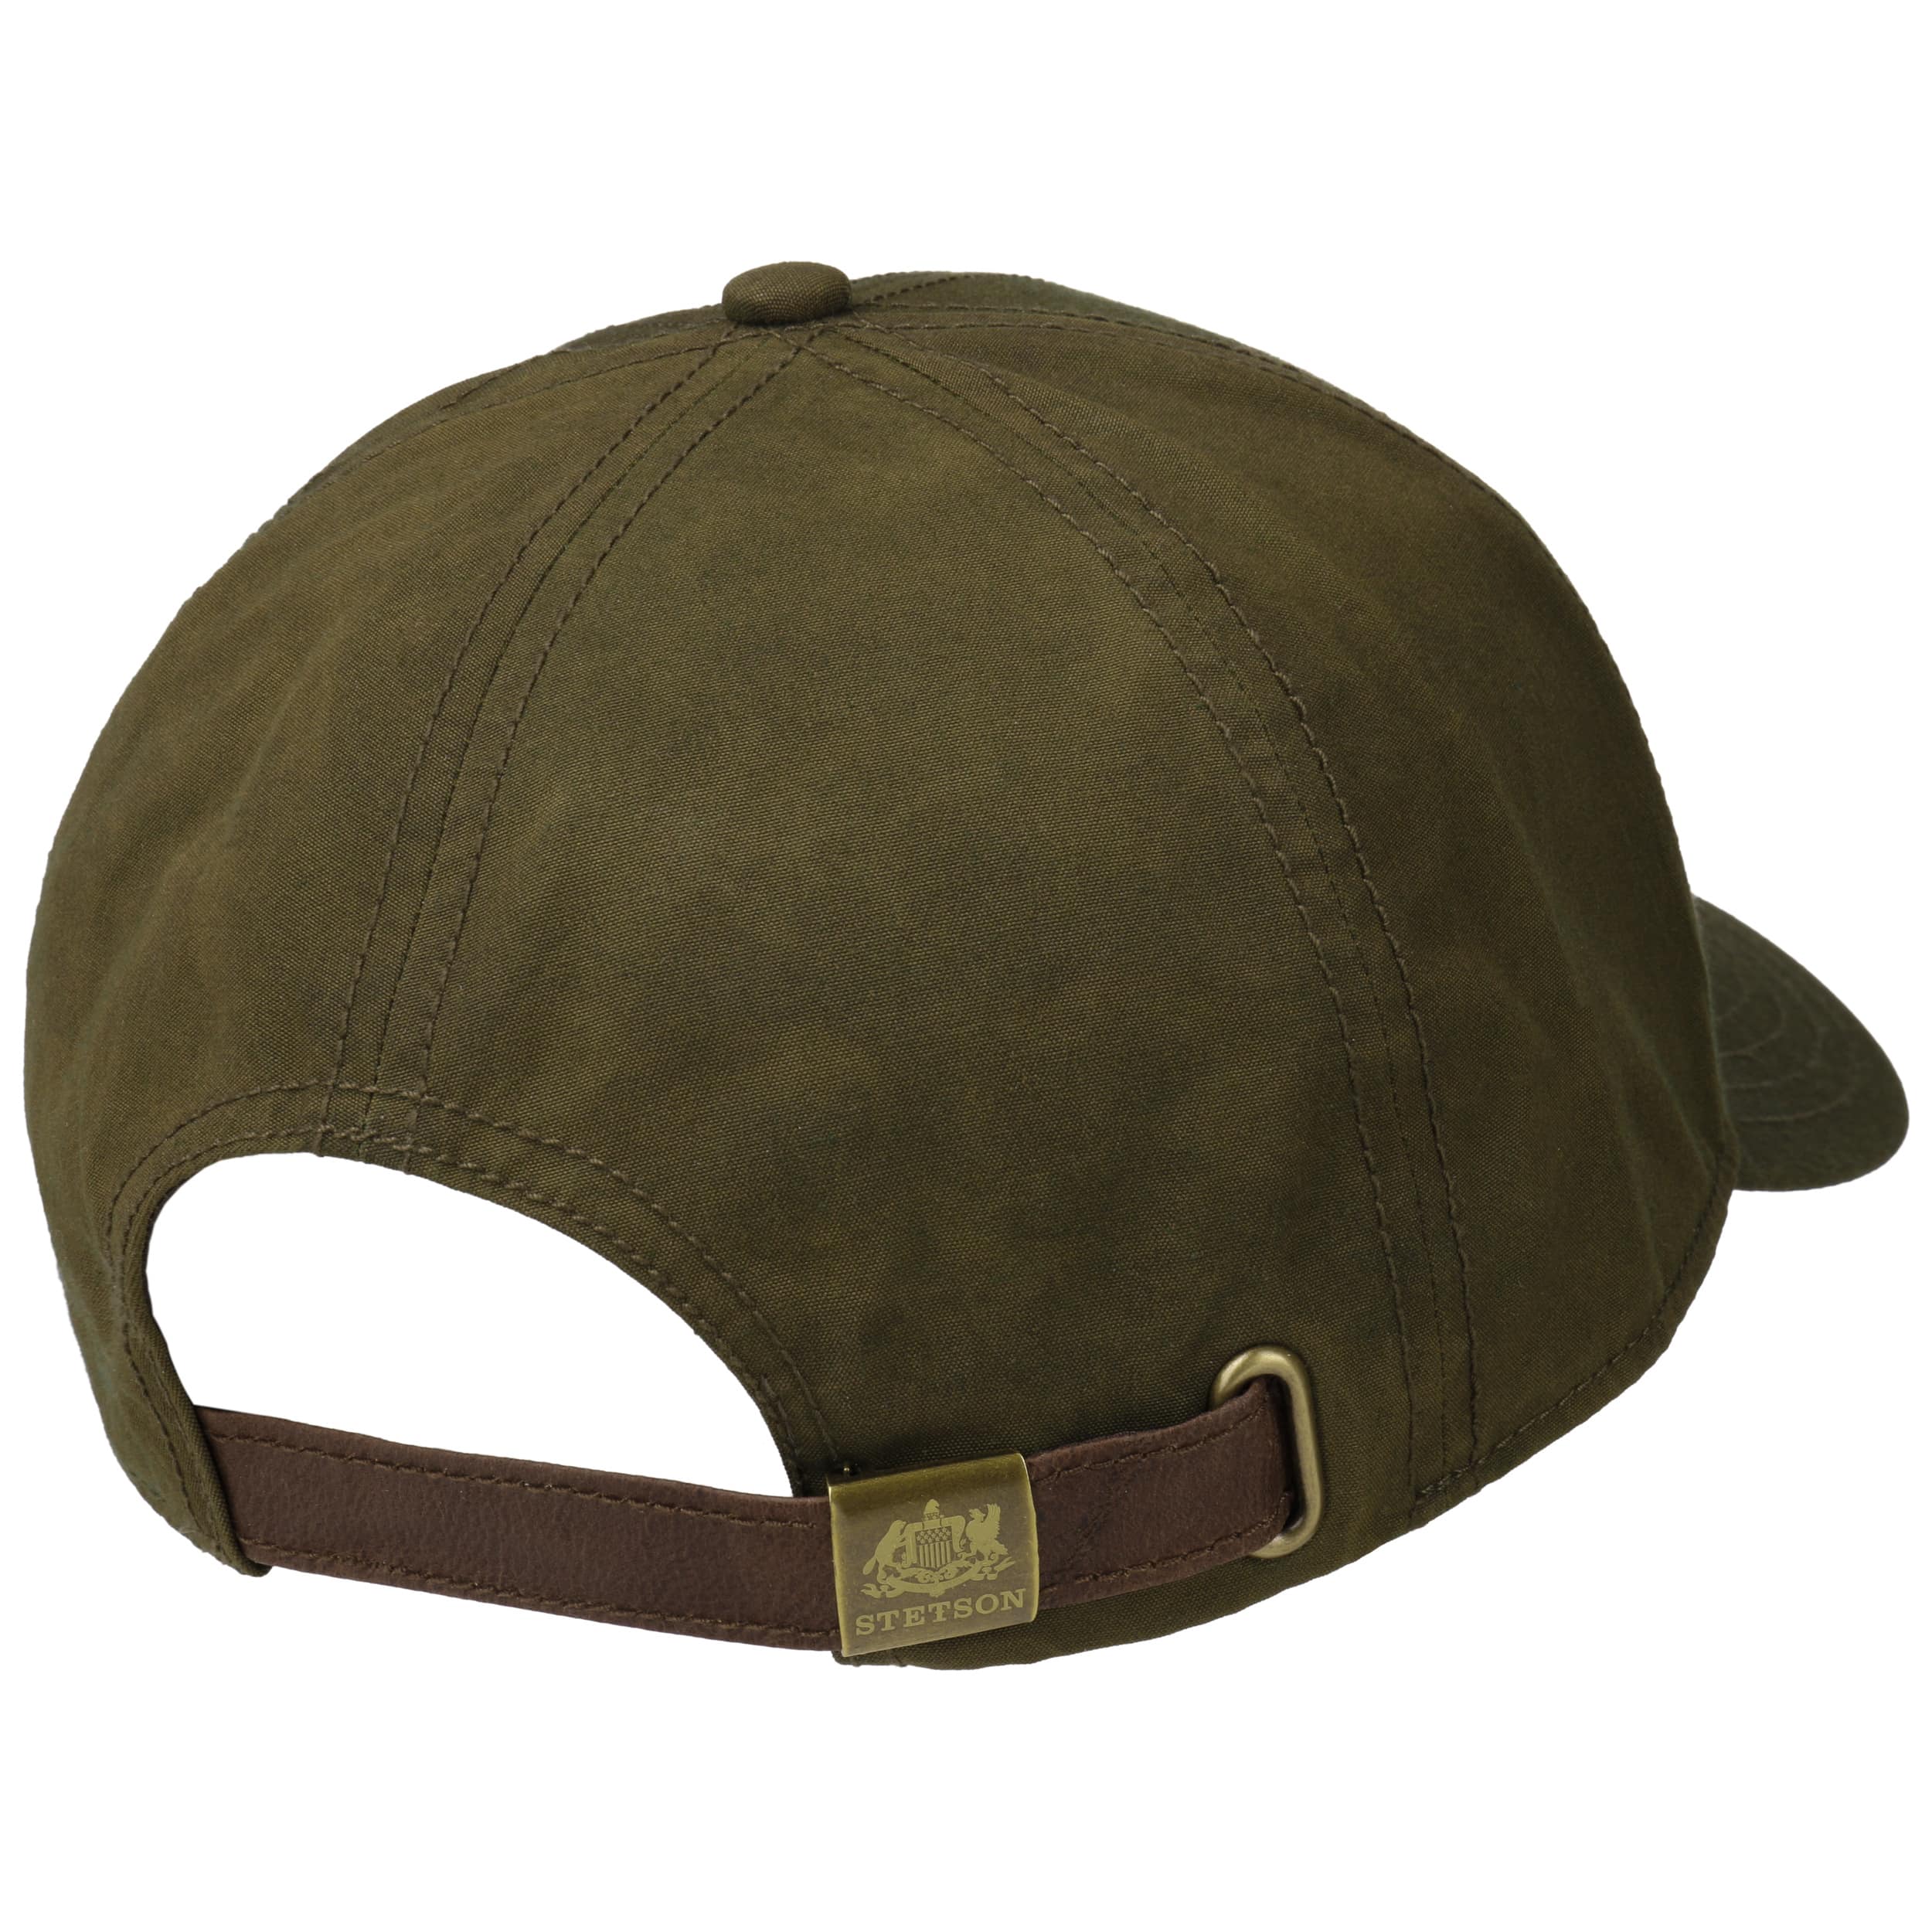 Waxed Cotton Cap with UV Protection by Stetson - 69,00